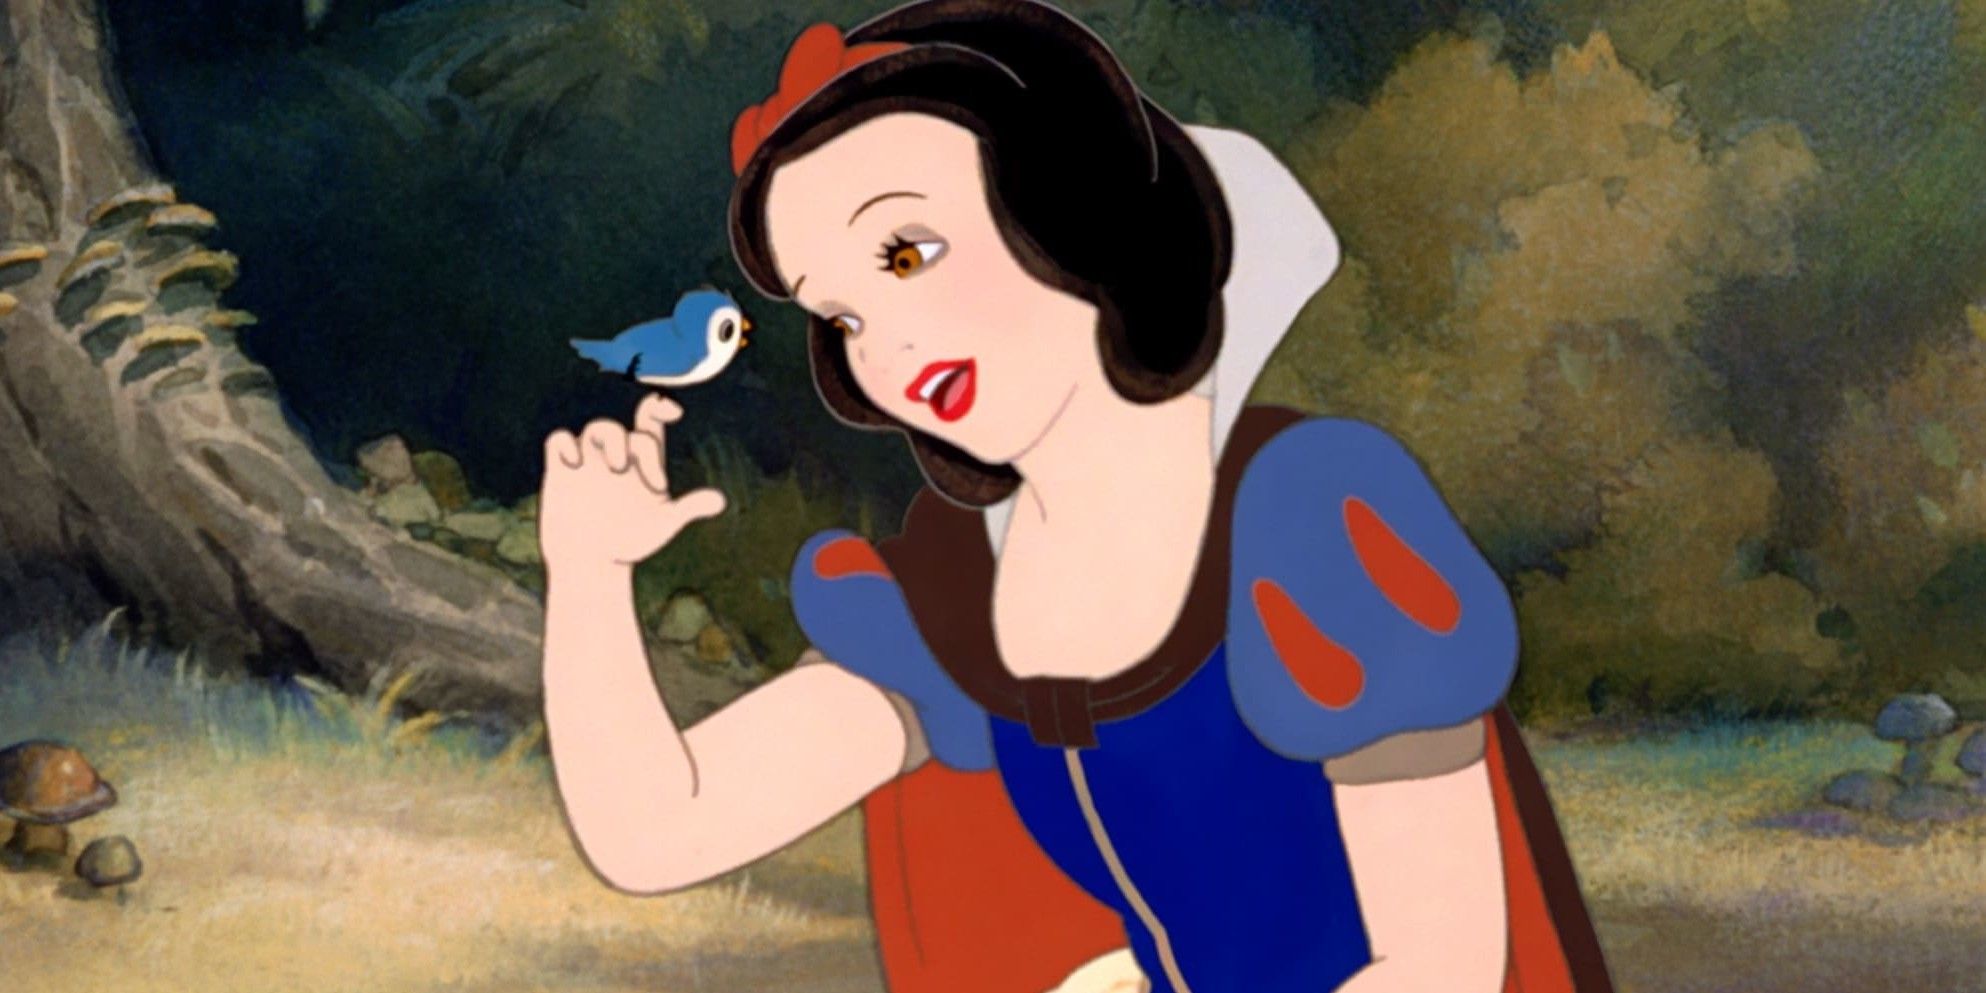 Snow White singing to a bird in Disney's animated Snow White And The Seven Dwarfs.